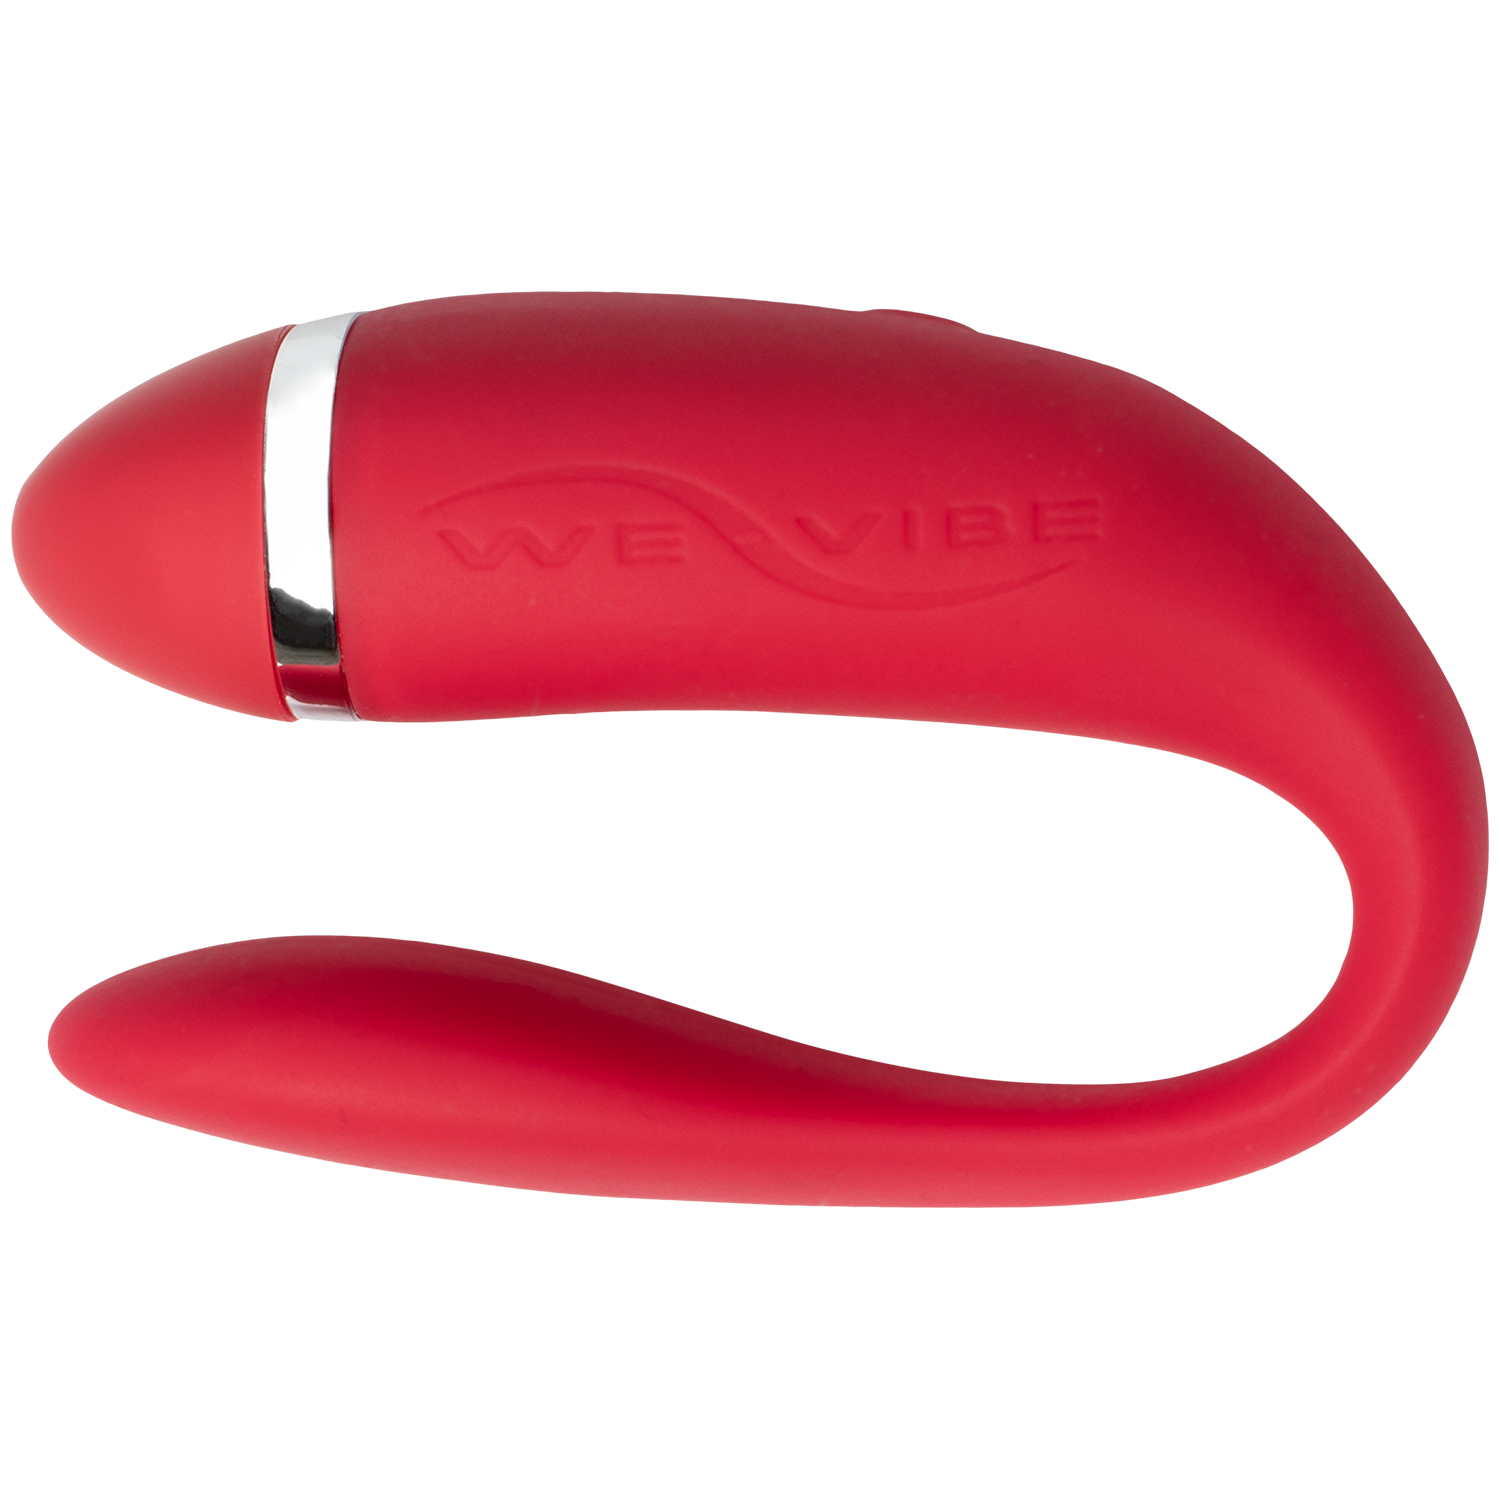 We-Vibe Special Edition Parvibrator